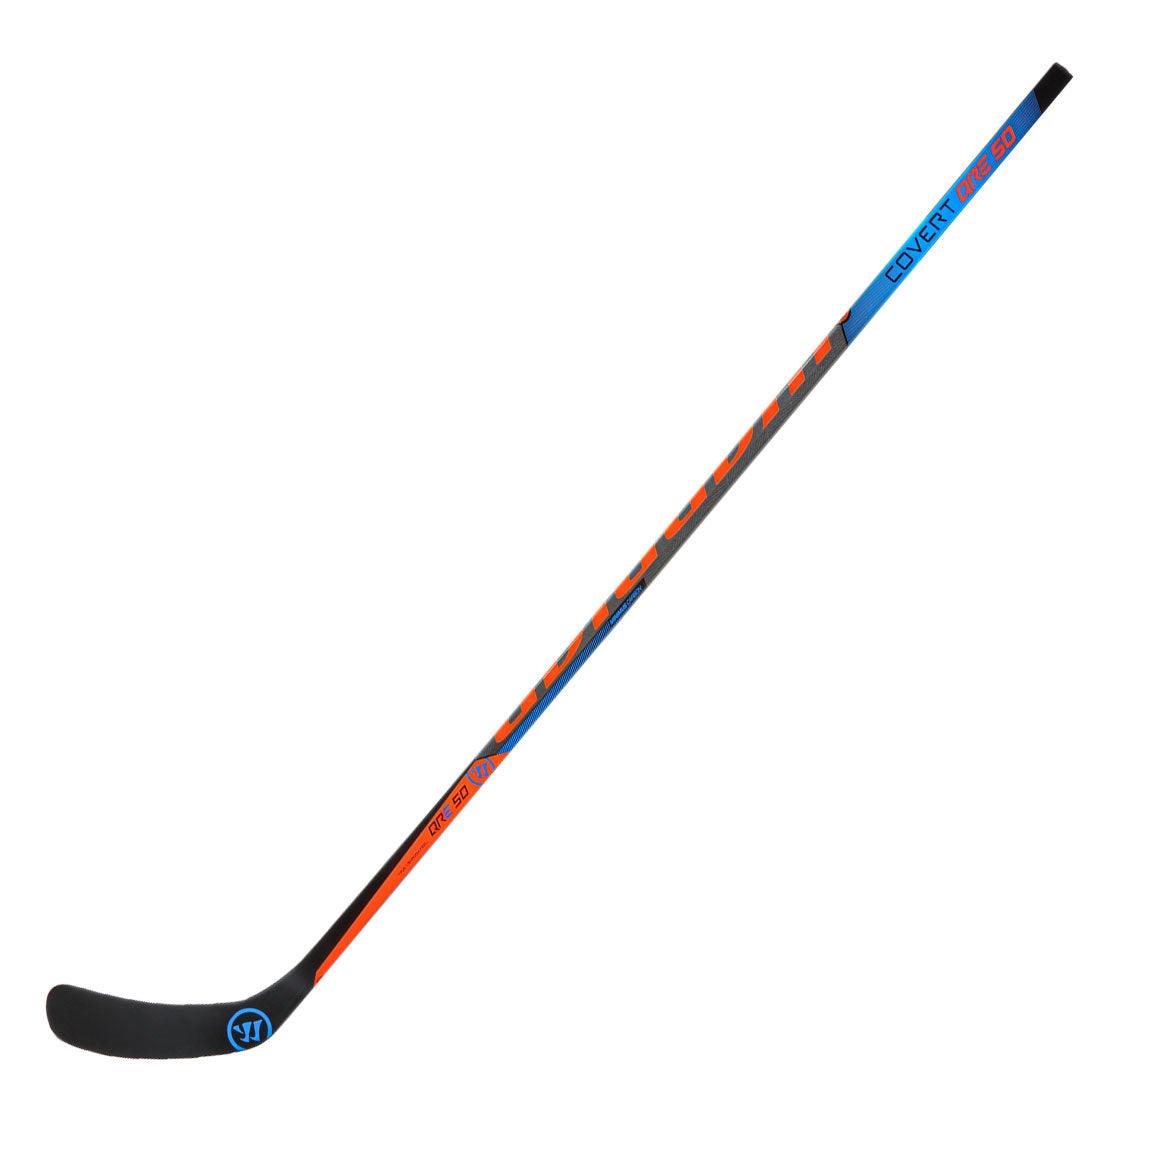 Covert QRE 50 Hockey Stick - Intermediate - Sports Excellence